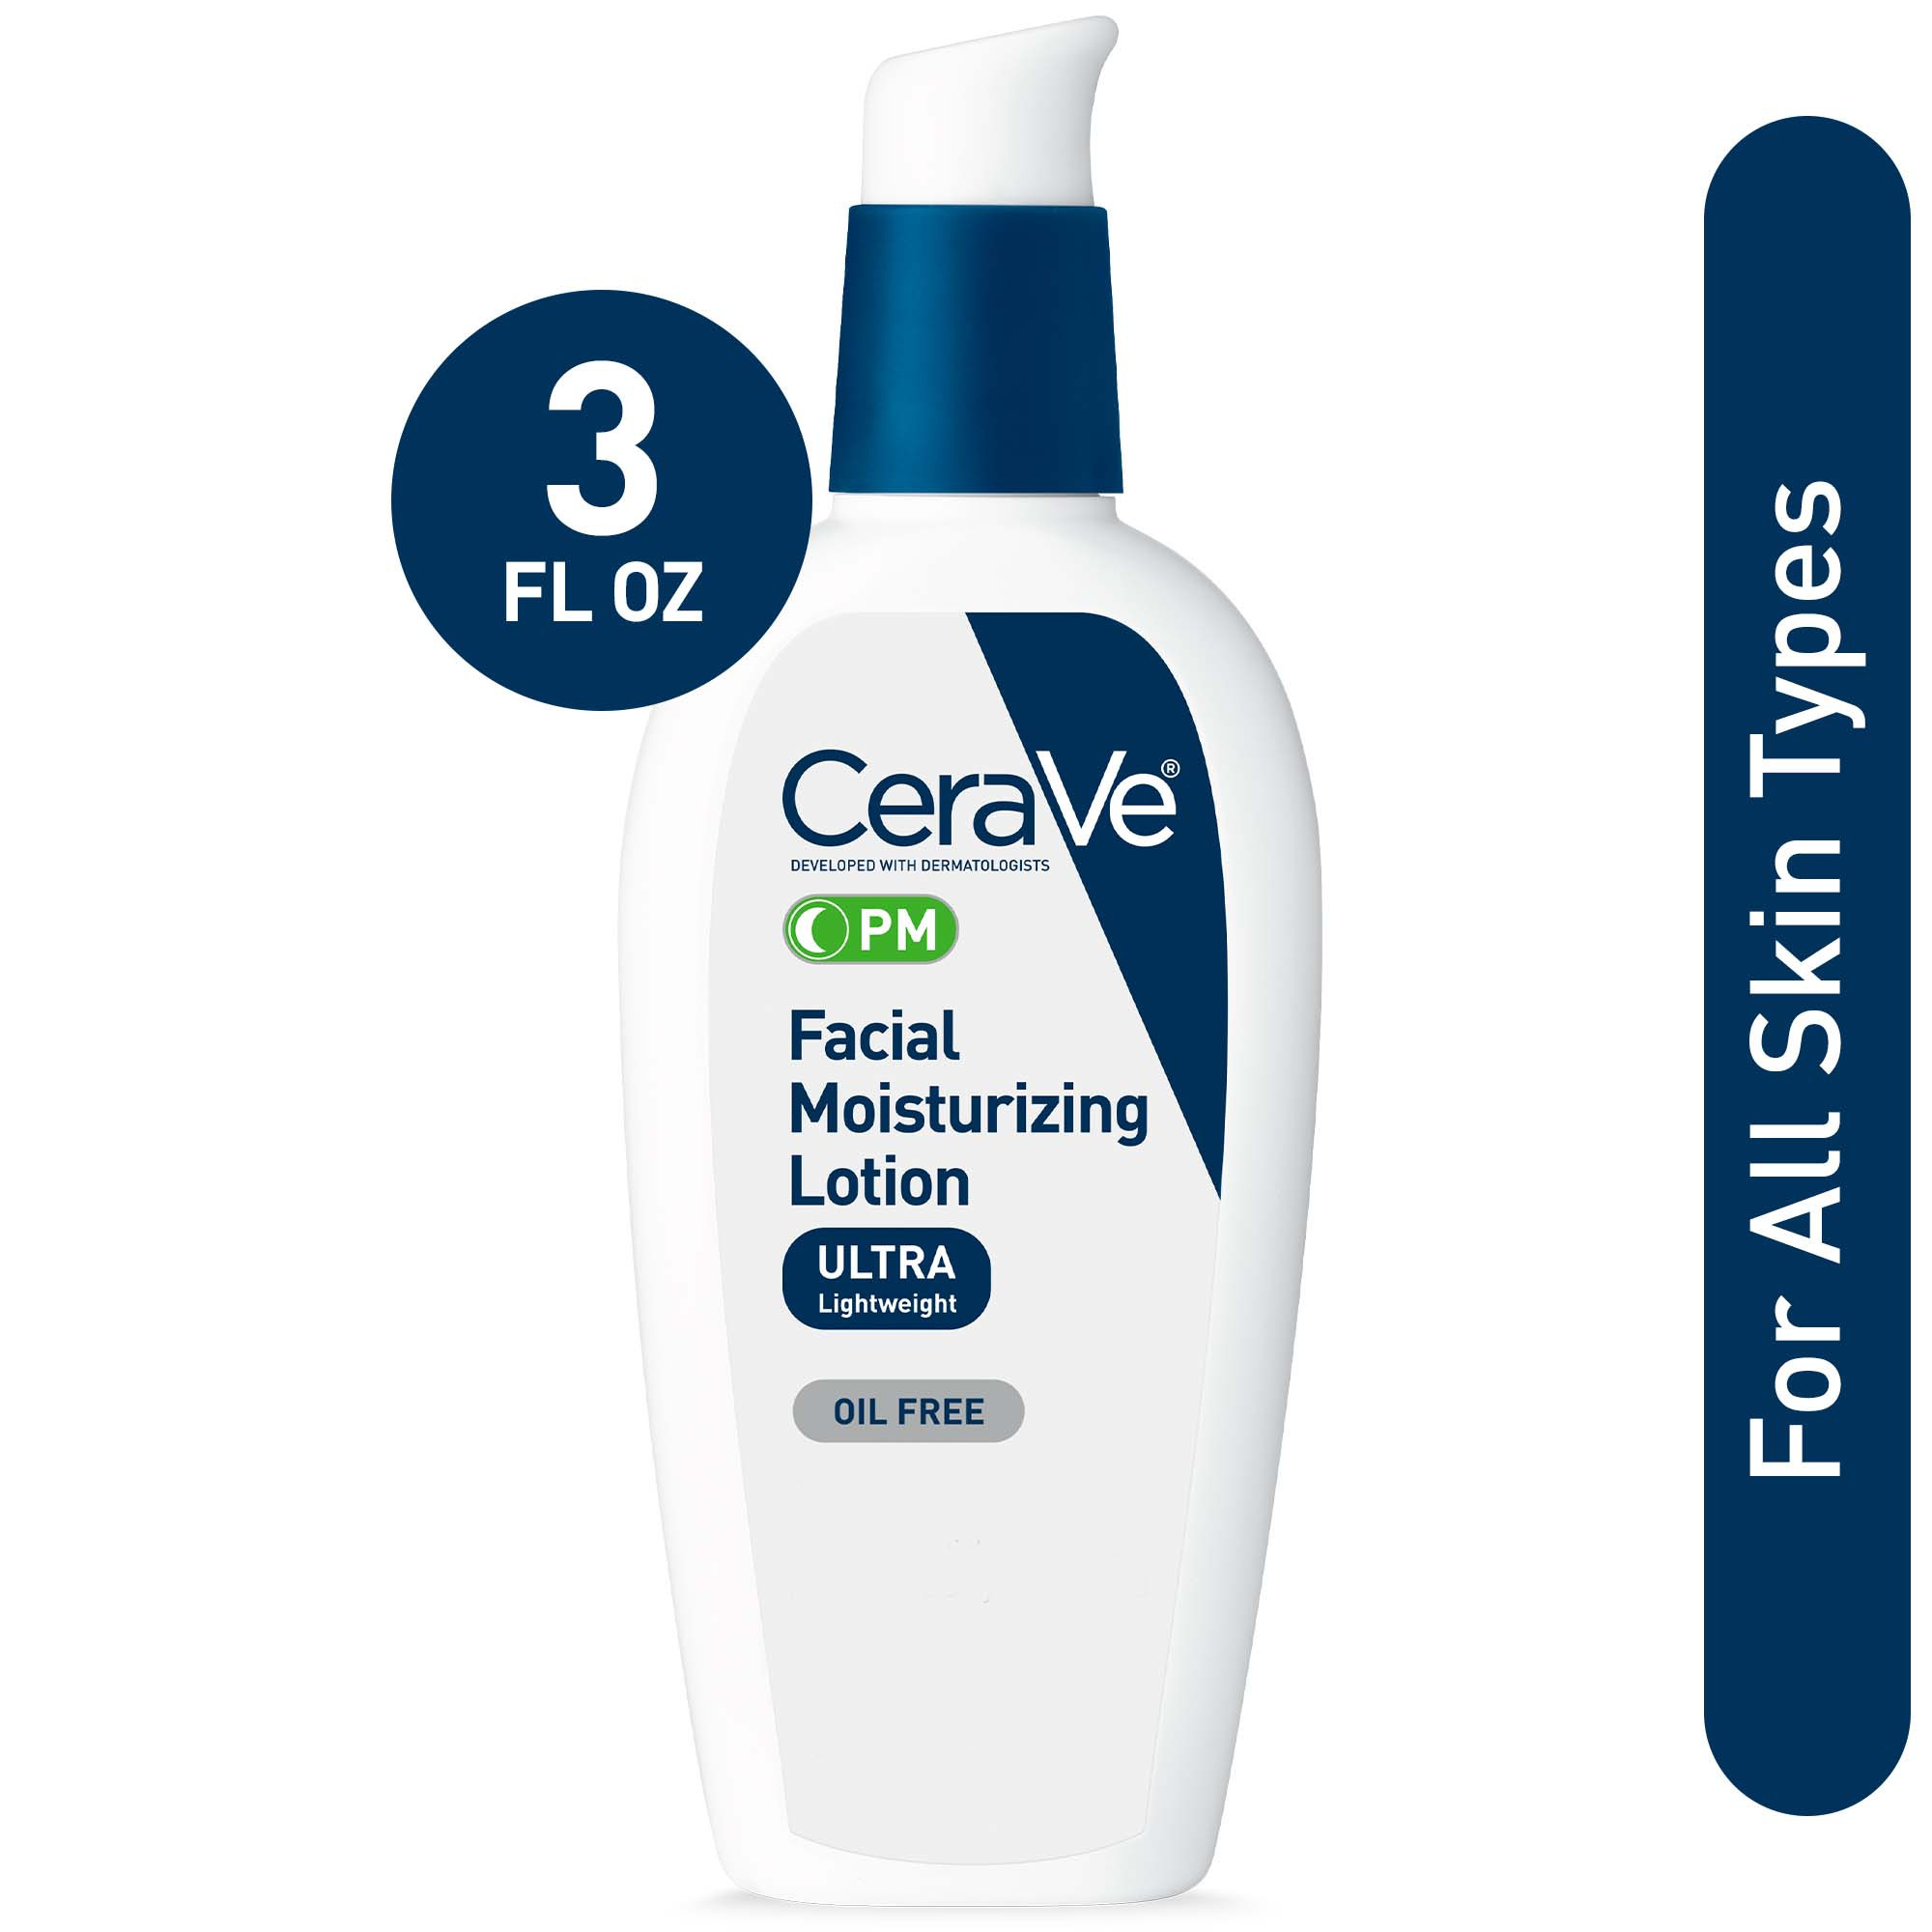 Cerave PM Moisturizing Face Lotion, Lightweight Oil-free Night Cream for all Skin Types, 3 fl oz - image 1 of 11